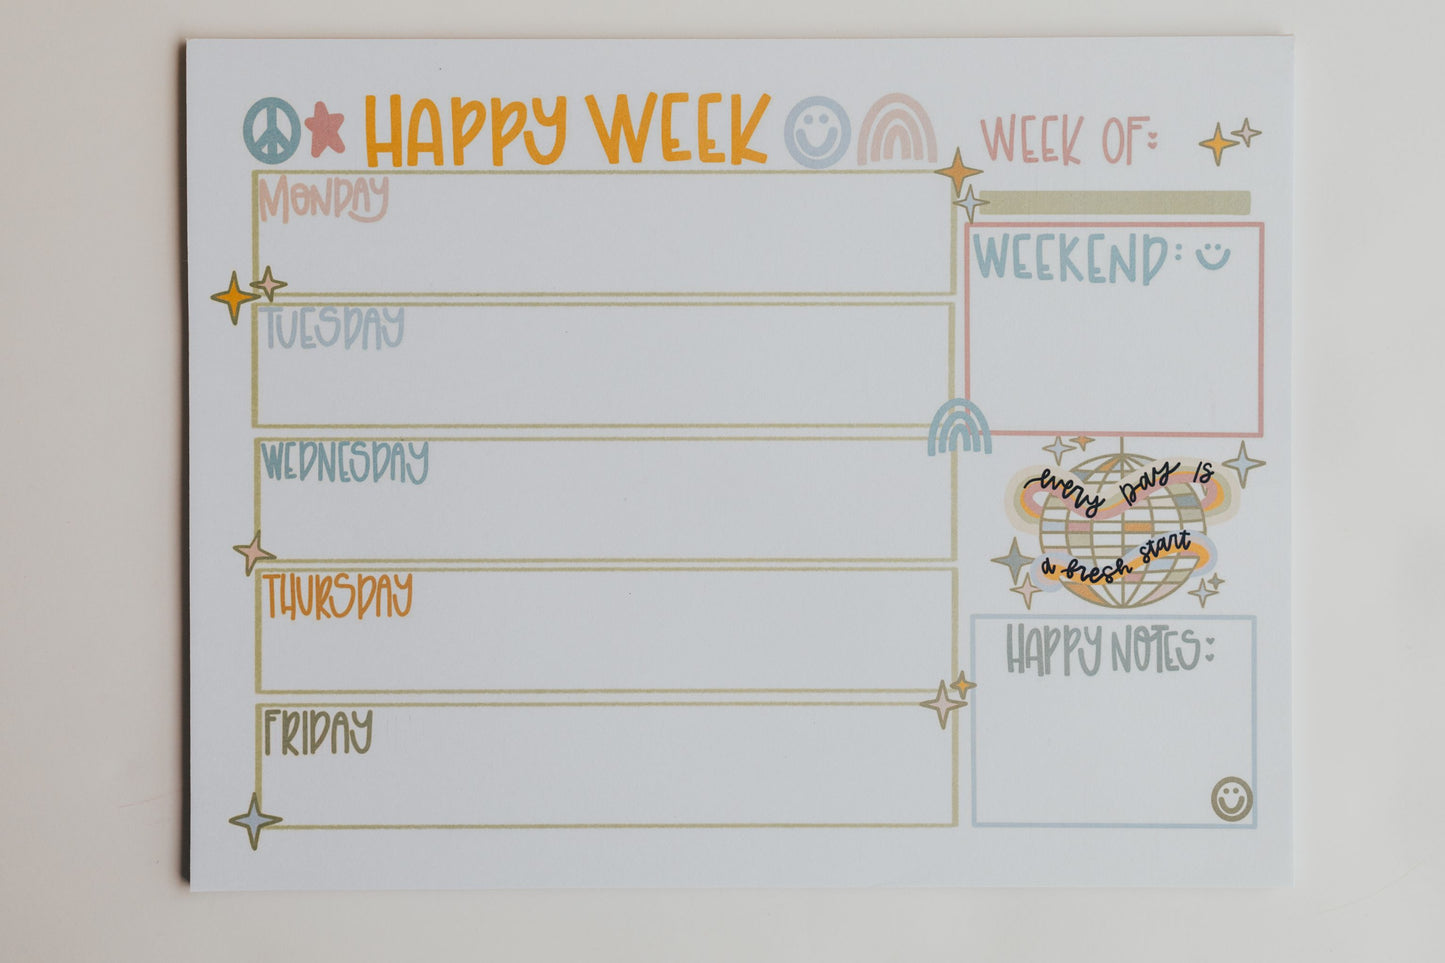 Happy Weekly Planner!